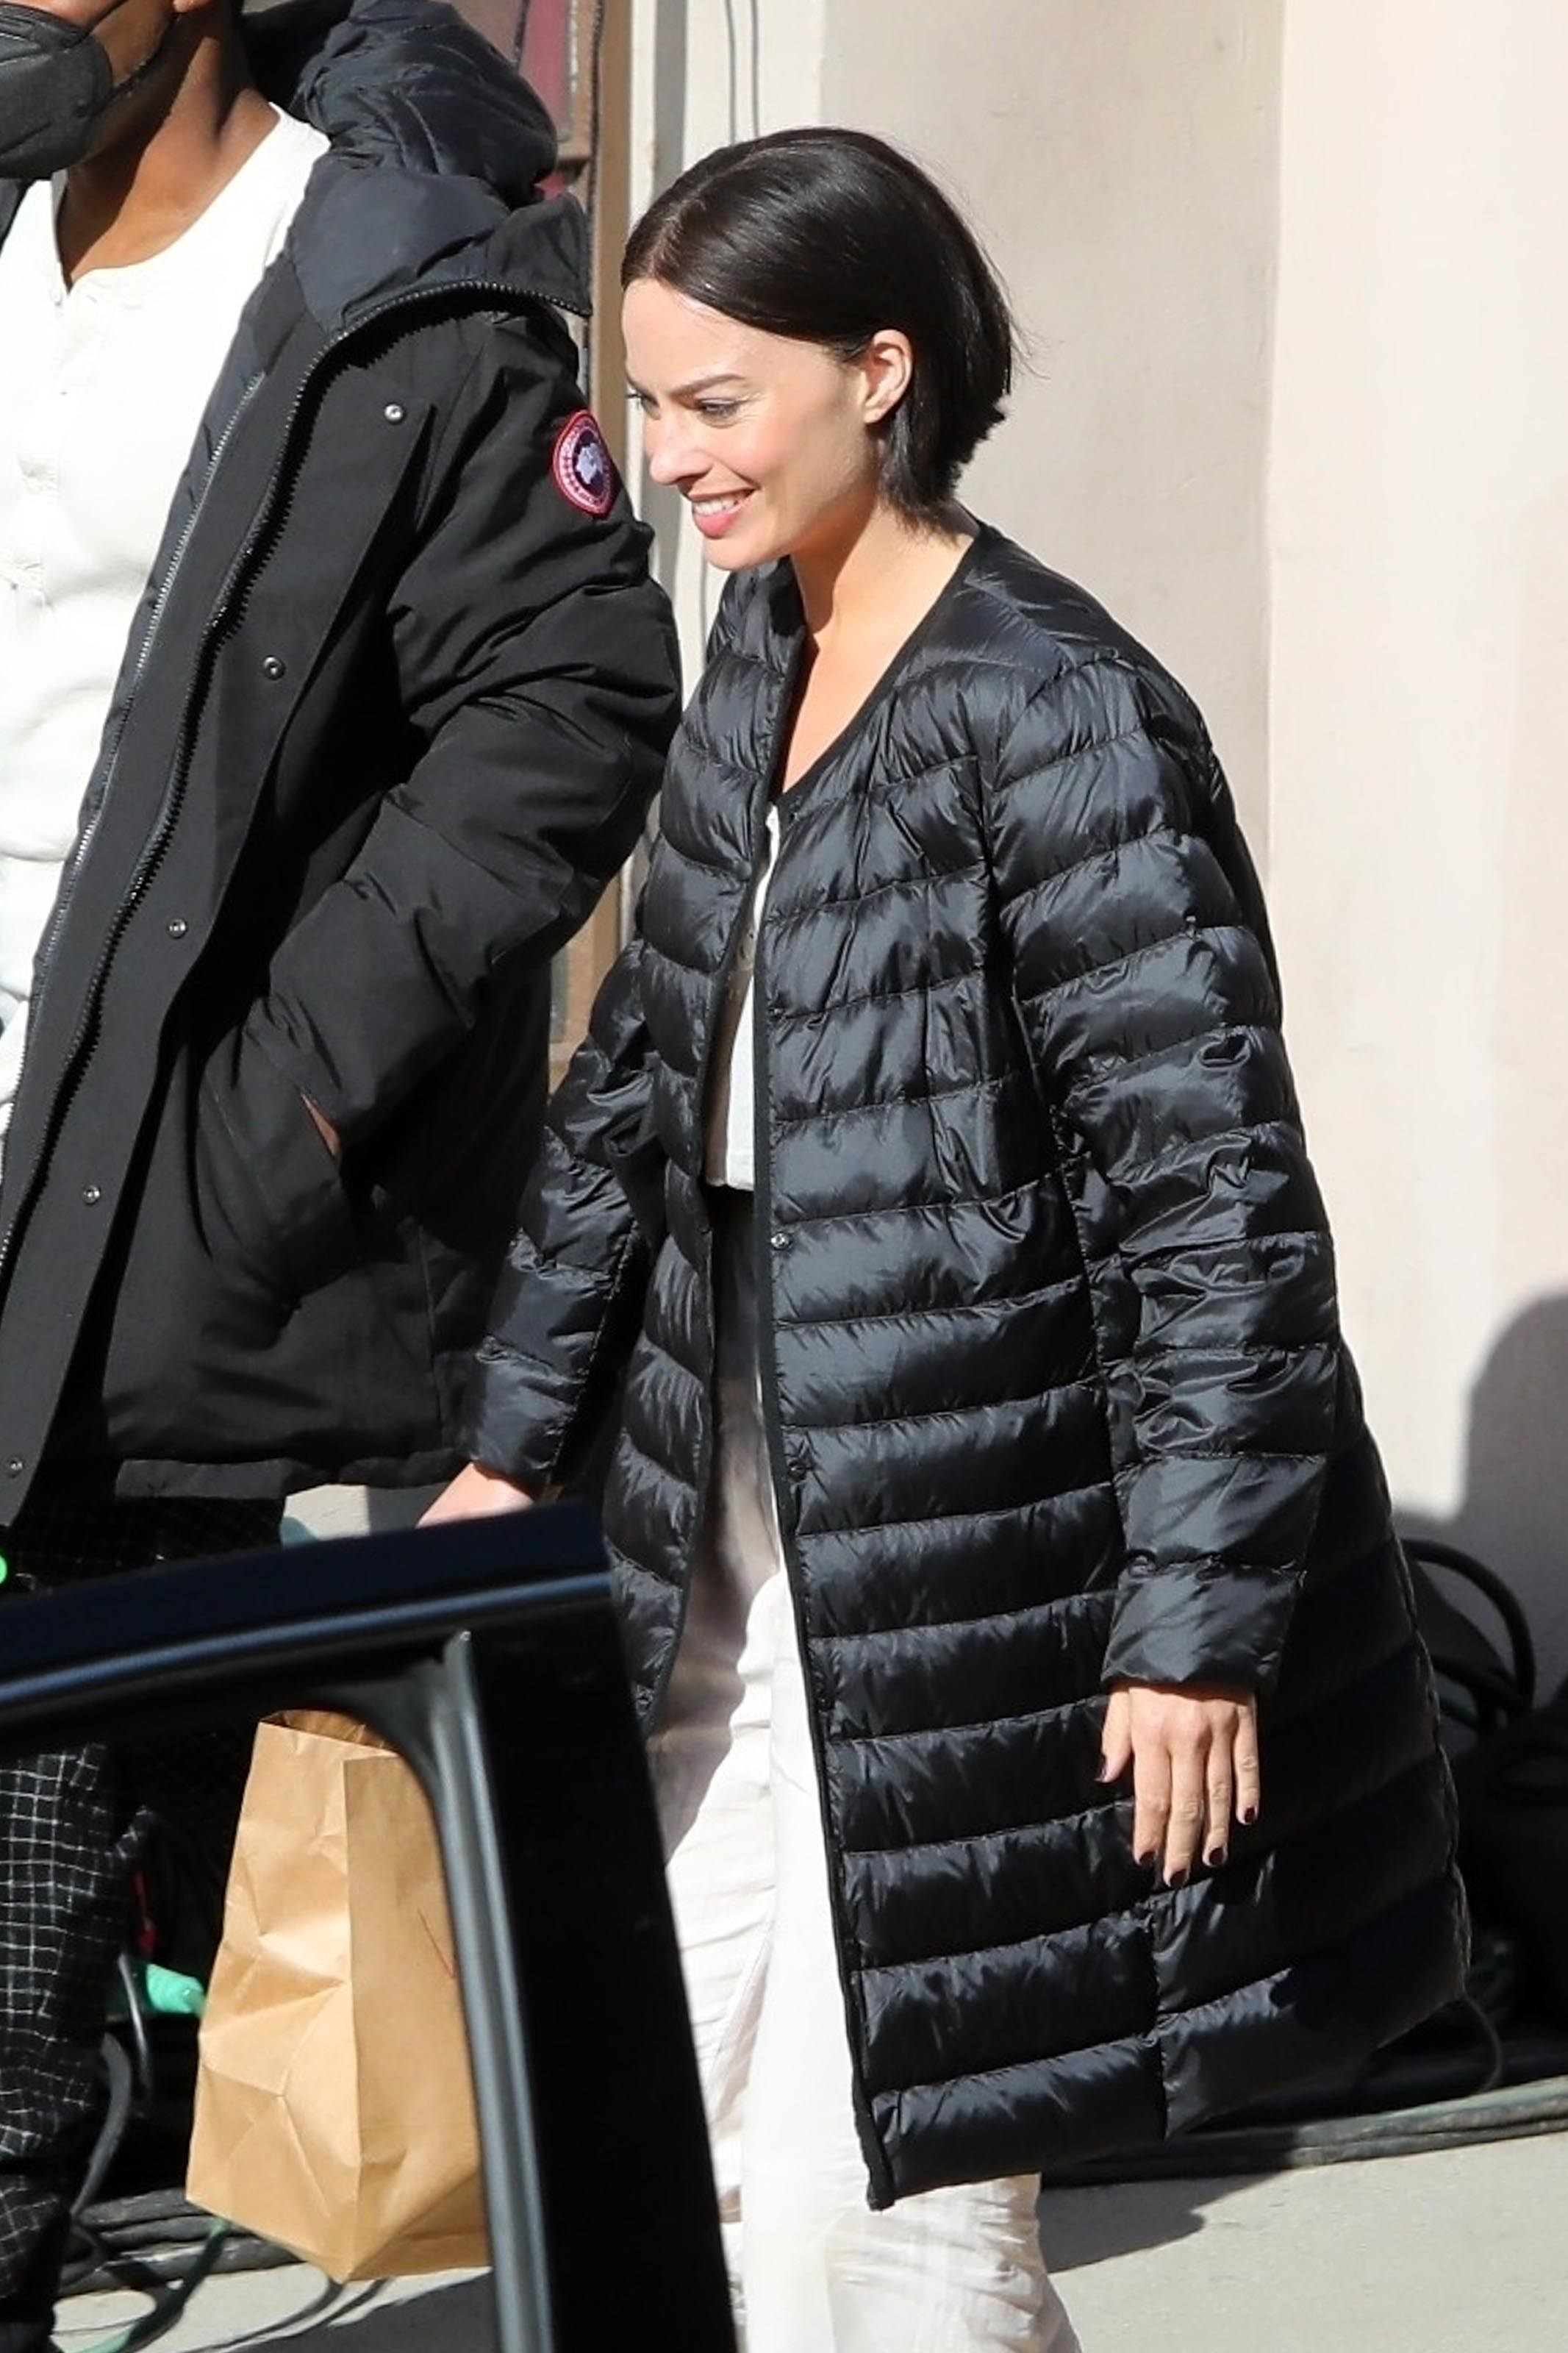 Photo © 2021 Backgrid/The Grosby Group16 MARCH 2021 Pasadena, CA  - *EXCLUSIVE* Margot Robbie and John David Washington head to the set from the makeup trailers while filming scenes for the Untitled David O. Russell Project in Pasadena. (Foto: Backgrid/The Grosby Group)